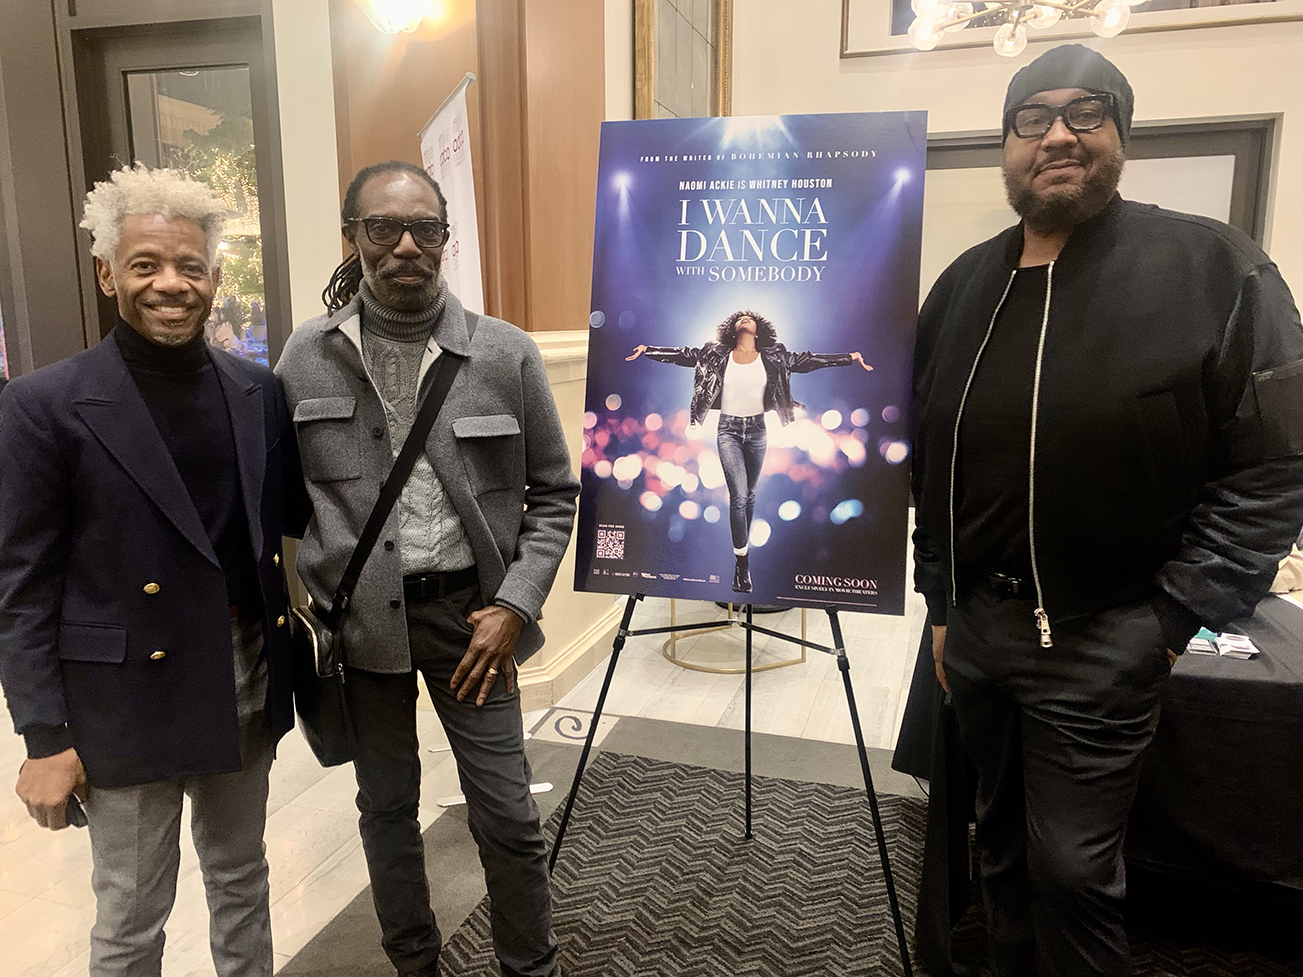 TJ Walker, Kevan Hall, and Timothy Snell attend the BDC & AAFCA Screening of Whitney Houston: I Wanna Dance with Somebody on December 19, 2022, at AMC Grove in Los Angeles, CA